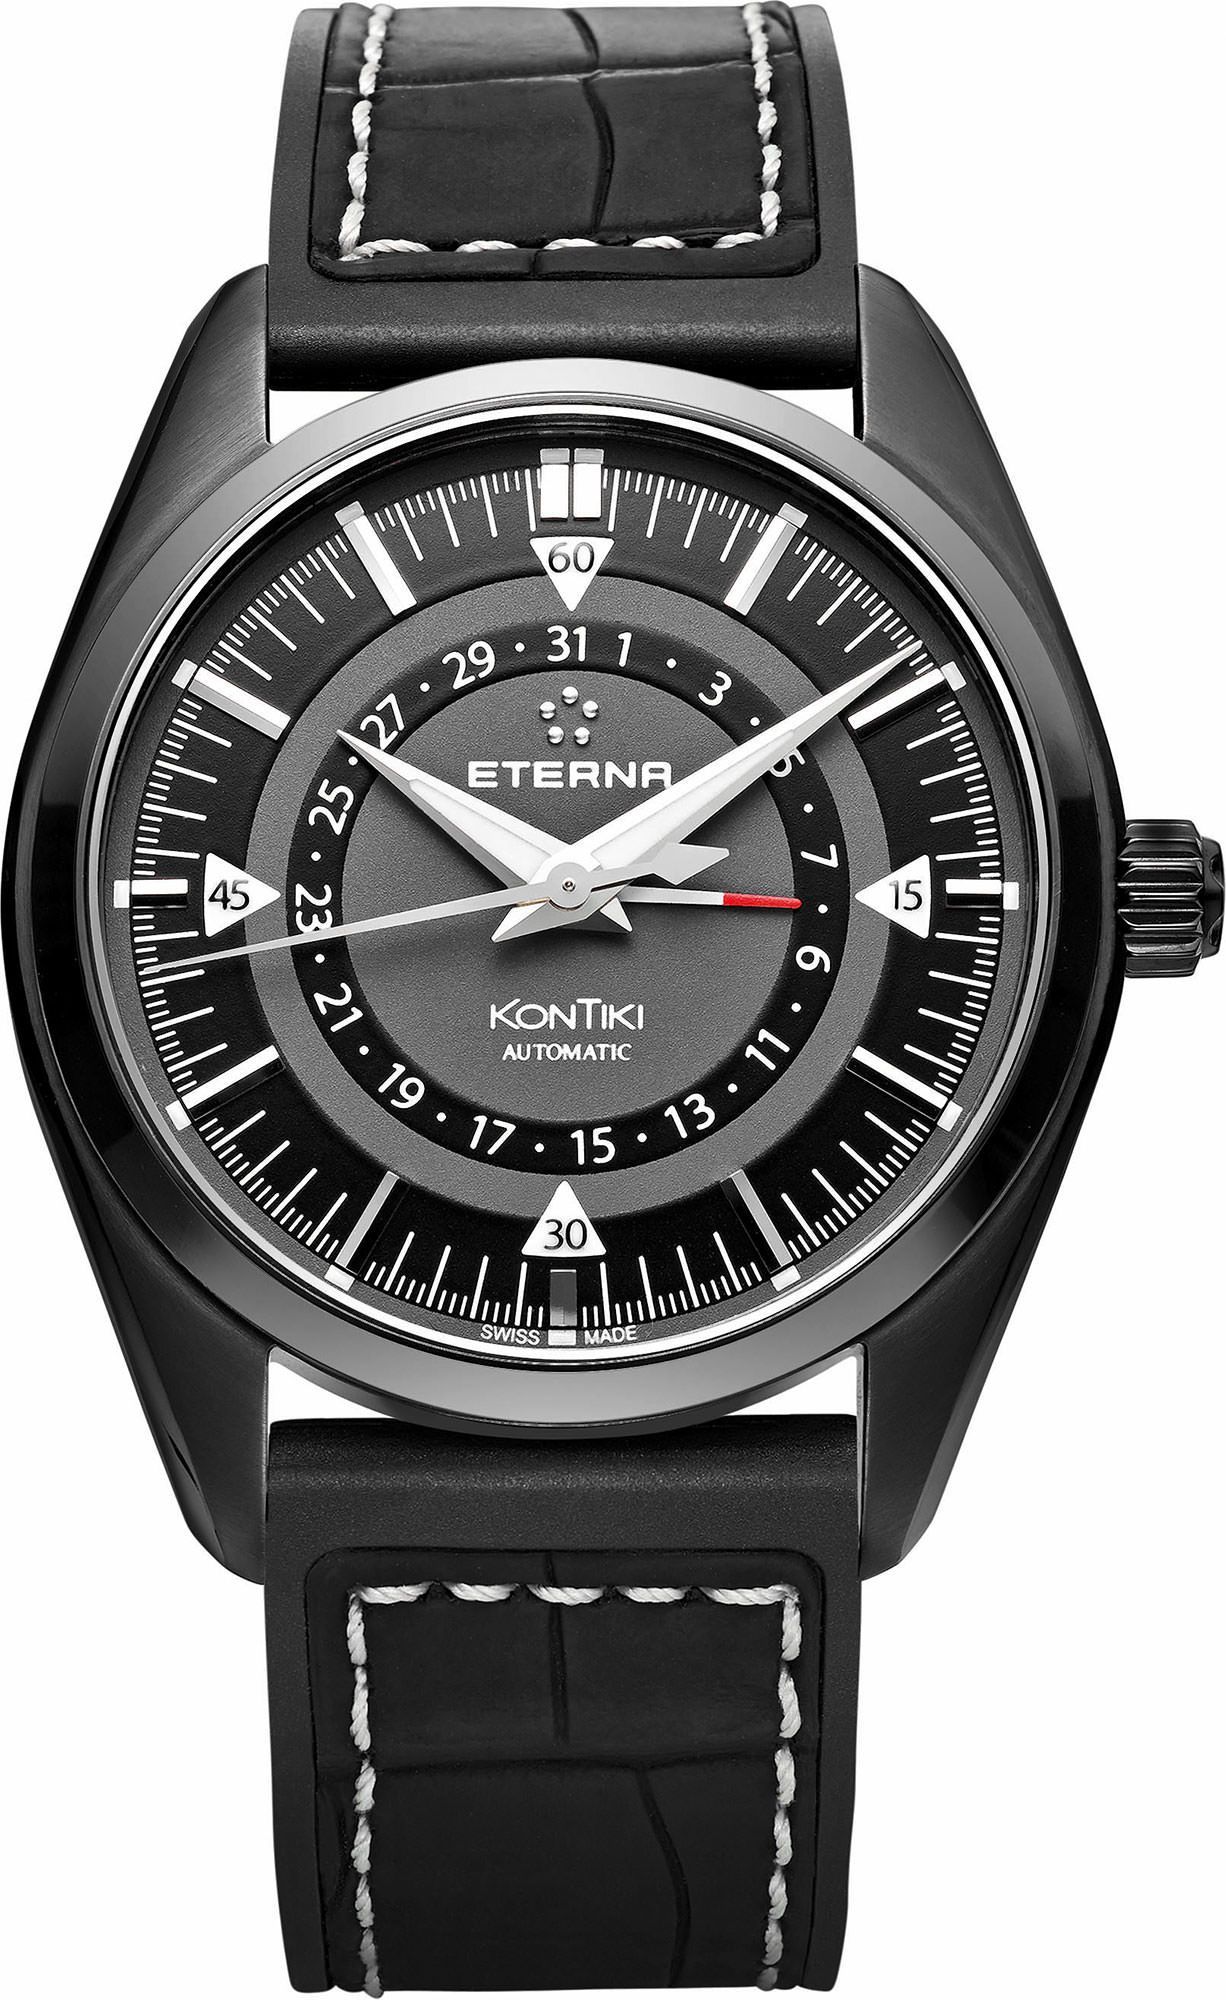 Eterna KonTiki  Anthracite Dial 42 mm Automatic Watch For Men - 1